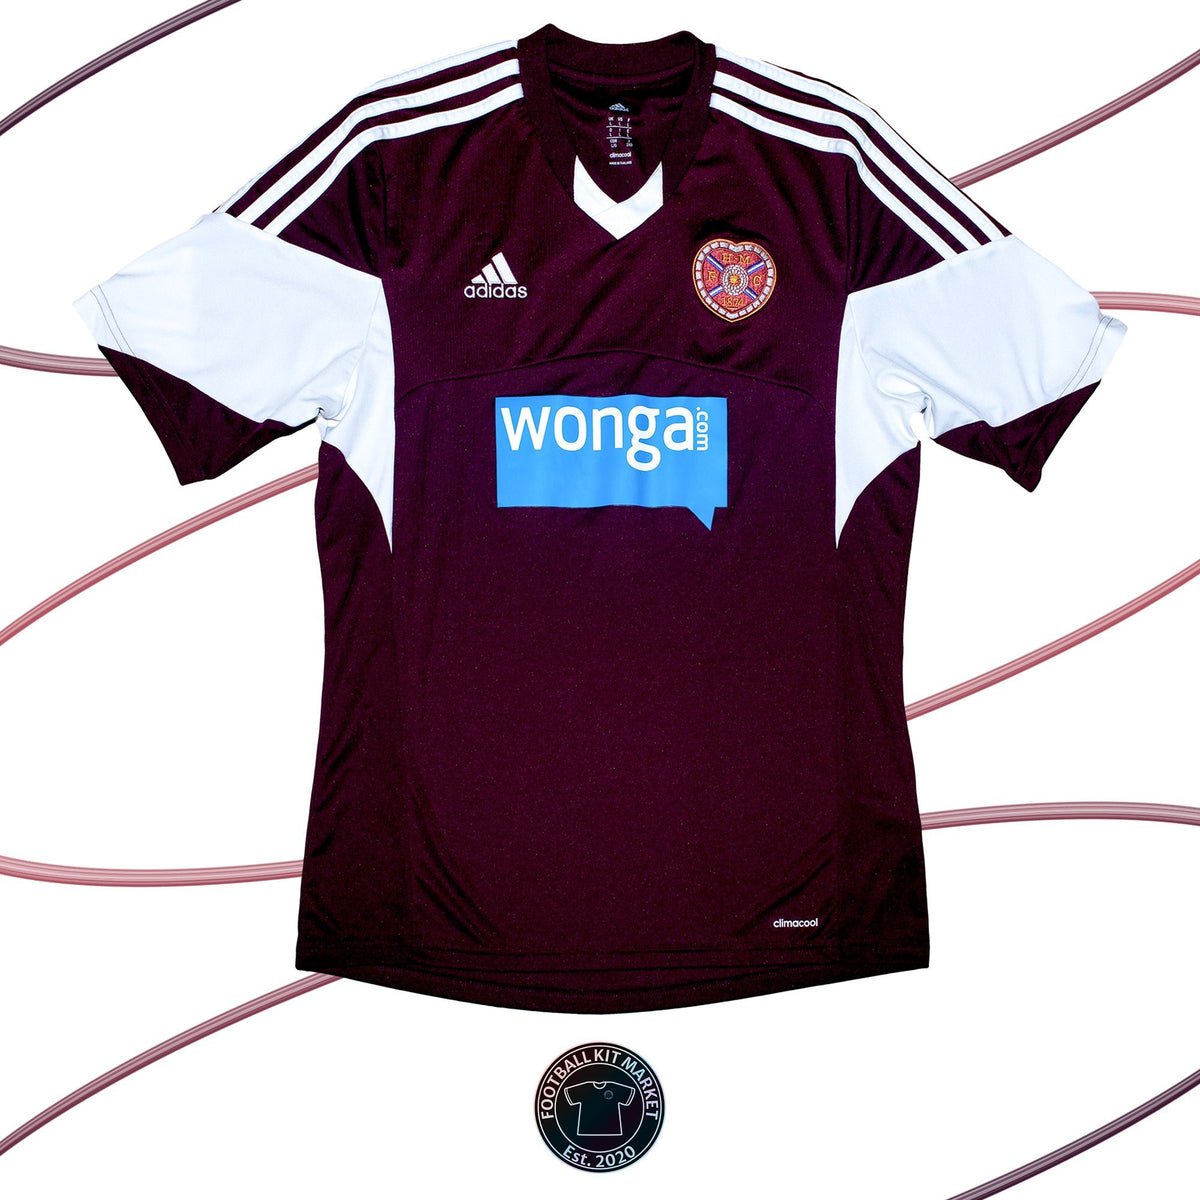 Genuine HEART OF MIDLOTHIAN (HEARTS) Home (2013-2014) - ADIDAS (L) - Product Image from Football Kit Market